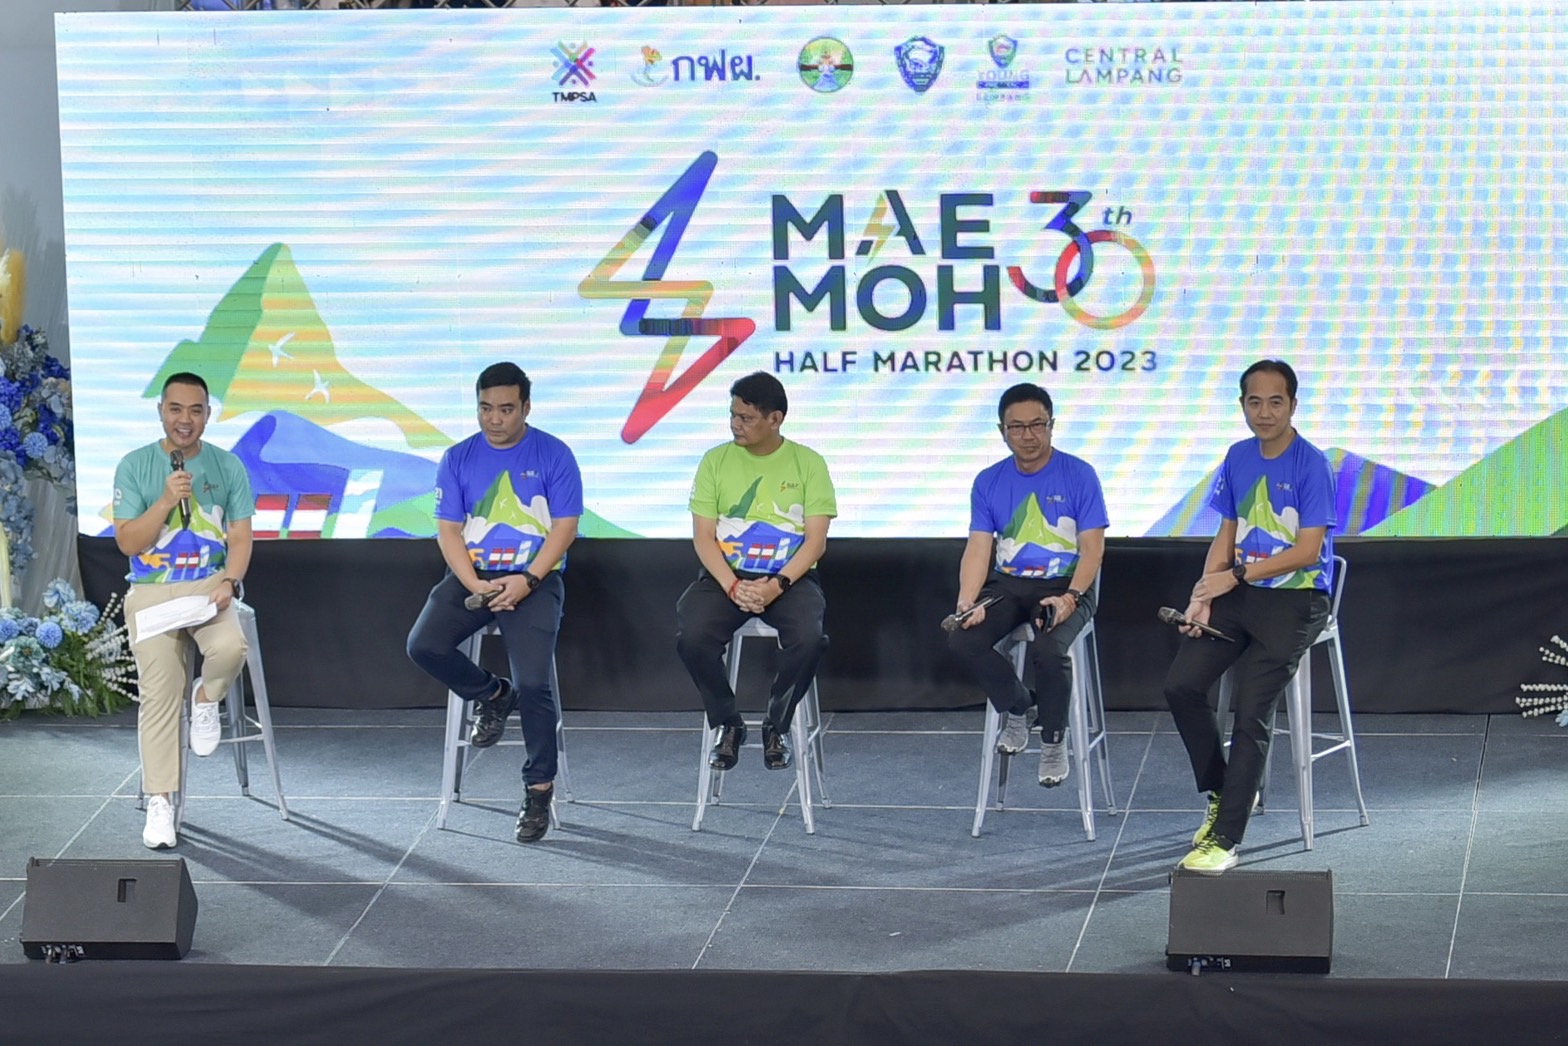 Get ready for “30th Mae Moh Half Marathon” to explore green routes in Lampang